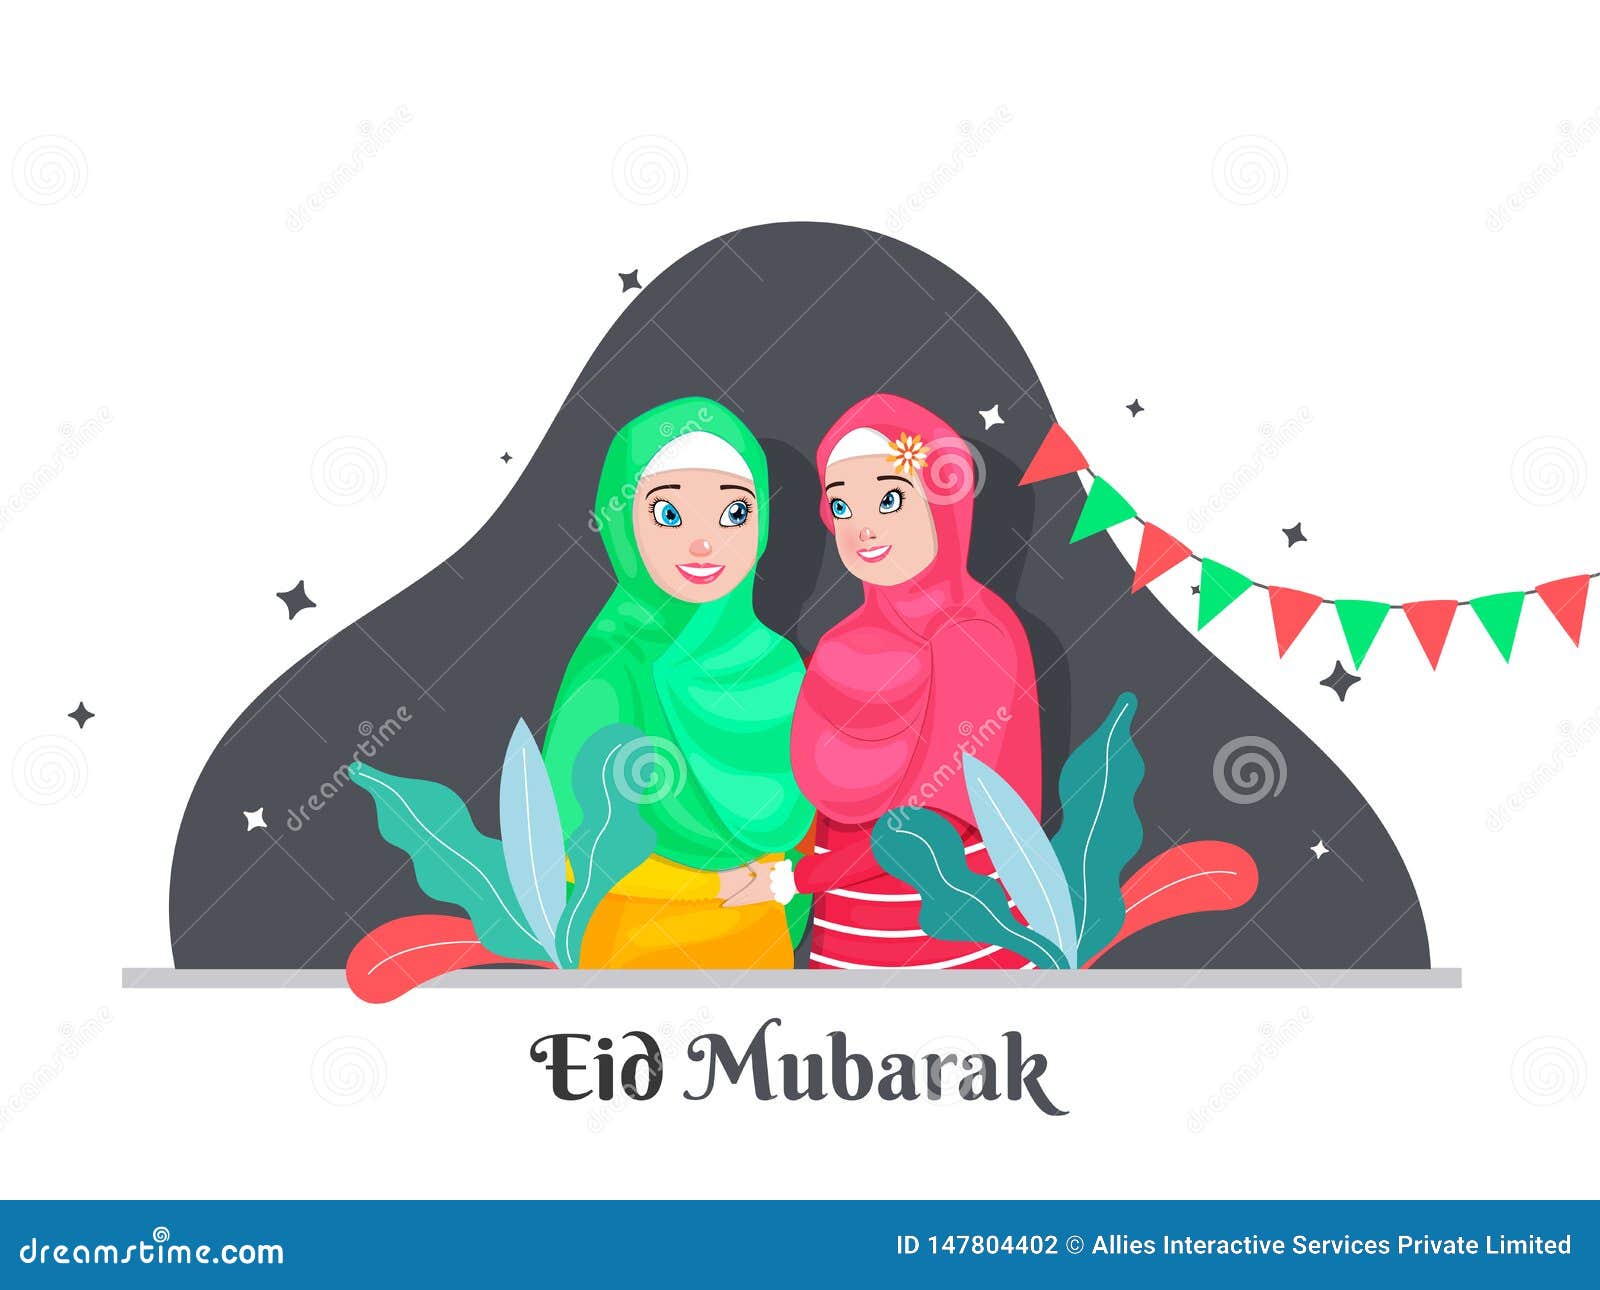 Cartoon Character of Cute and Happy Islamic Women Hugging Each Other in Eid  Mubarak Festival  Bunting Stock Illustration -  Illustration of banner, faceless: 147804402